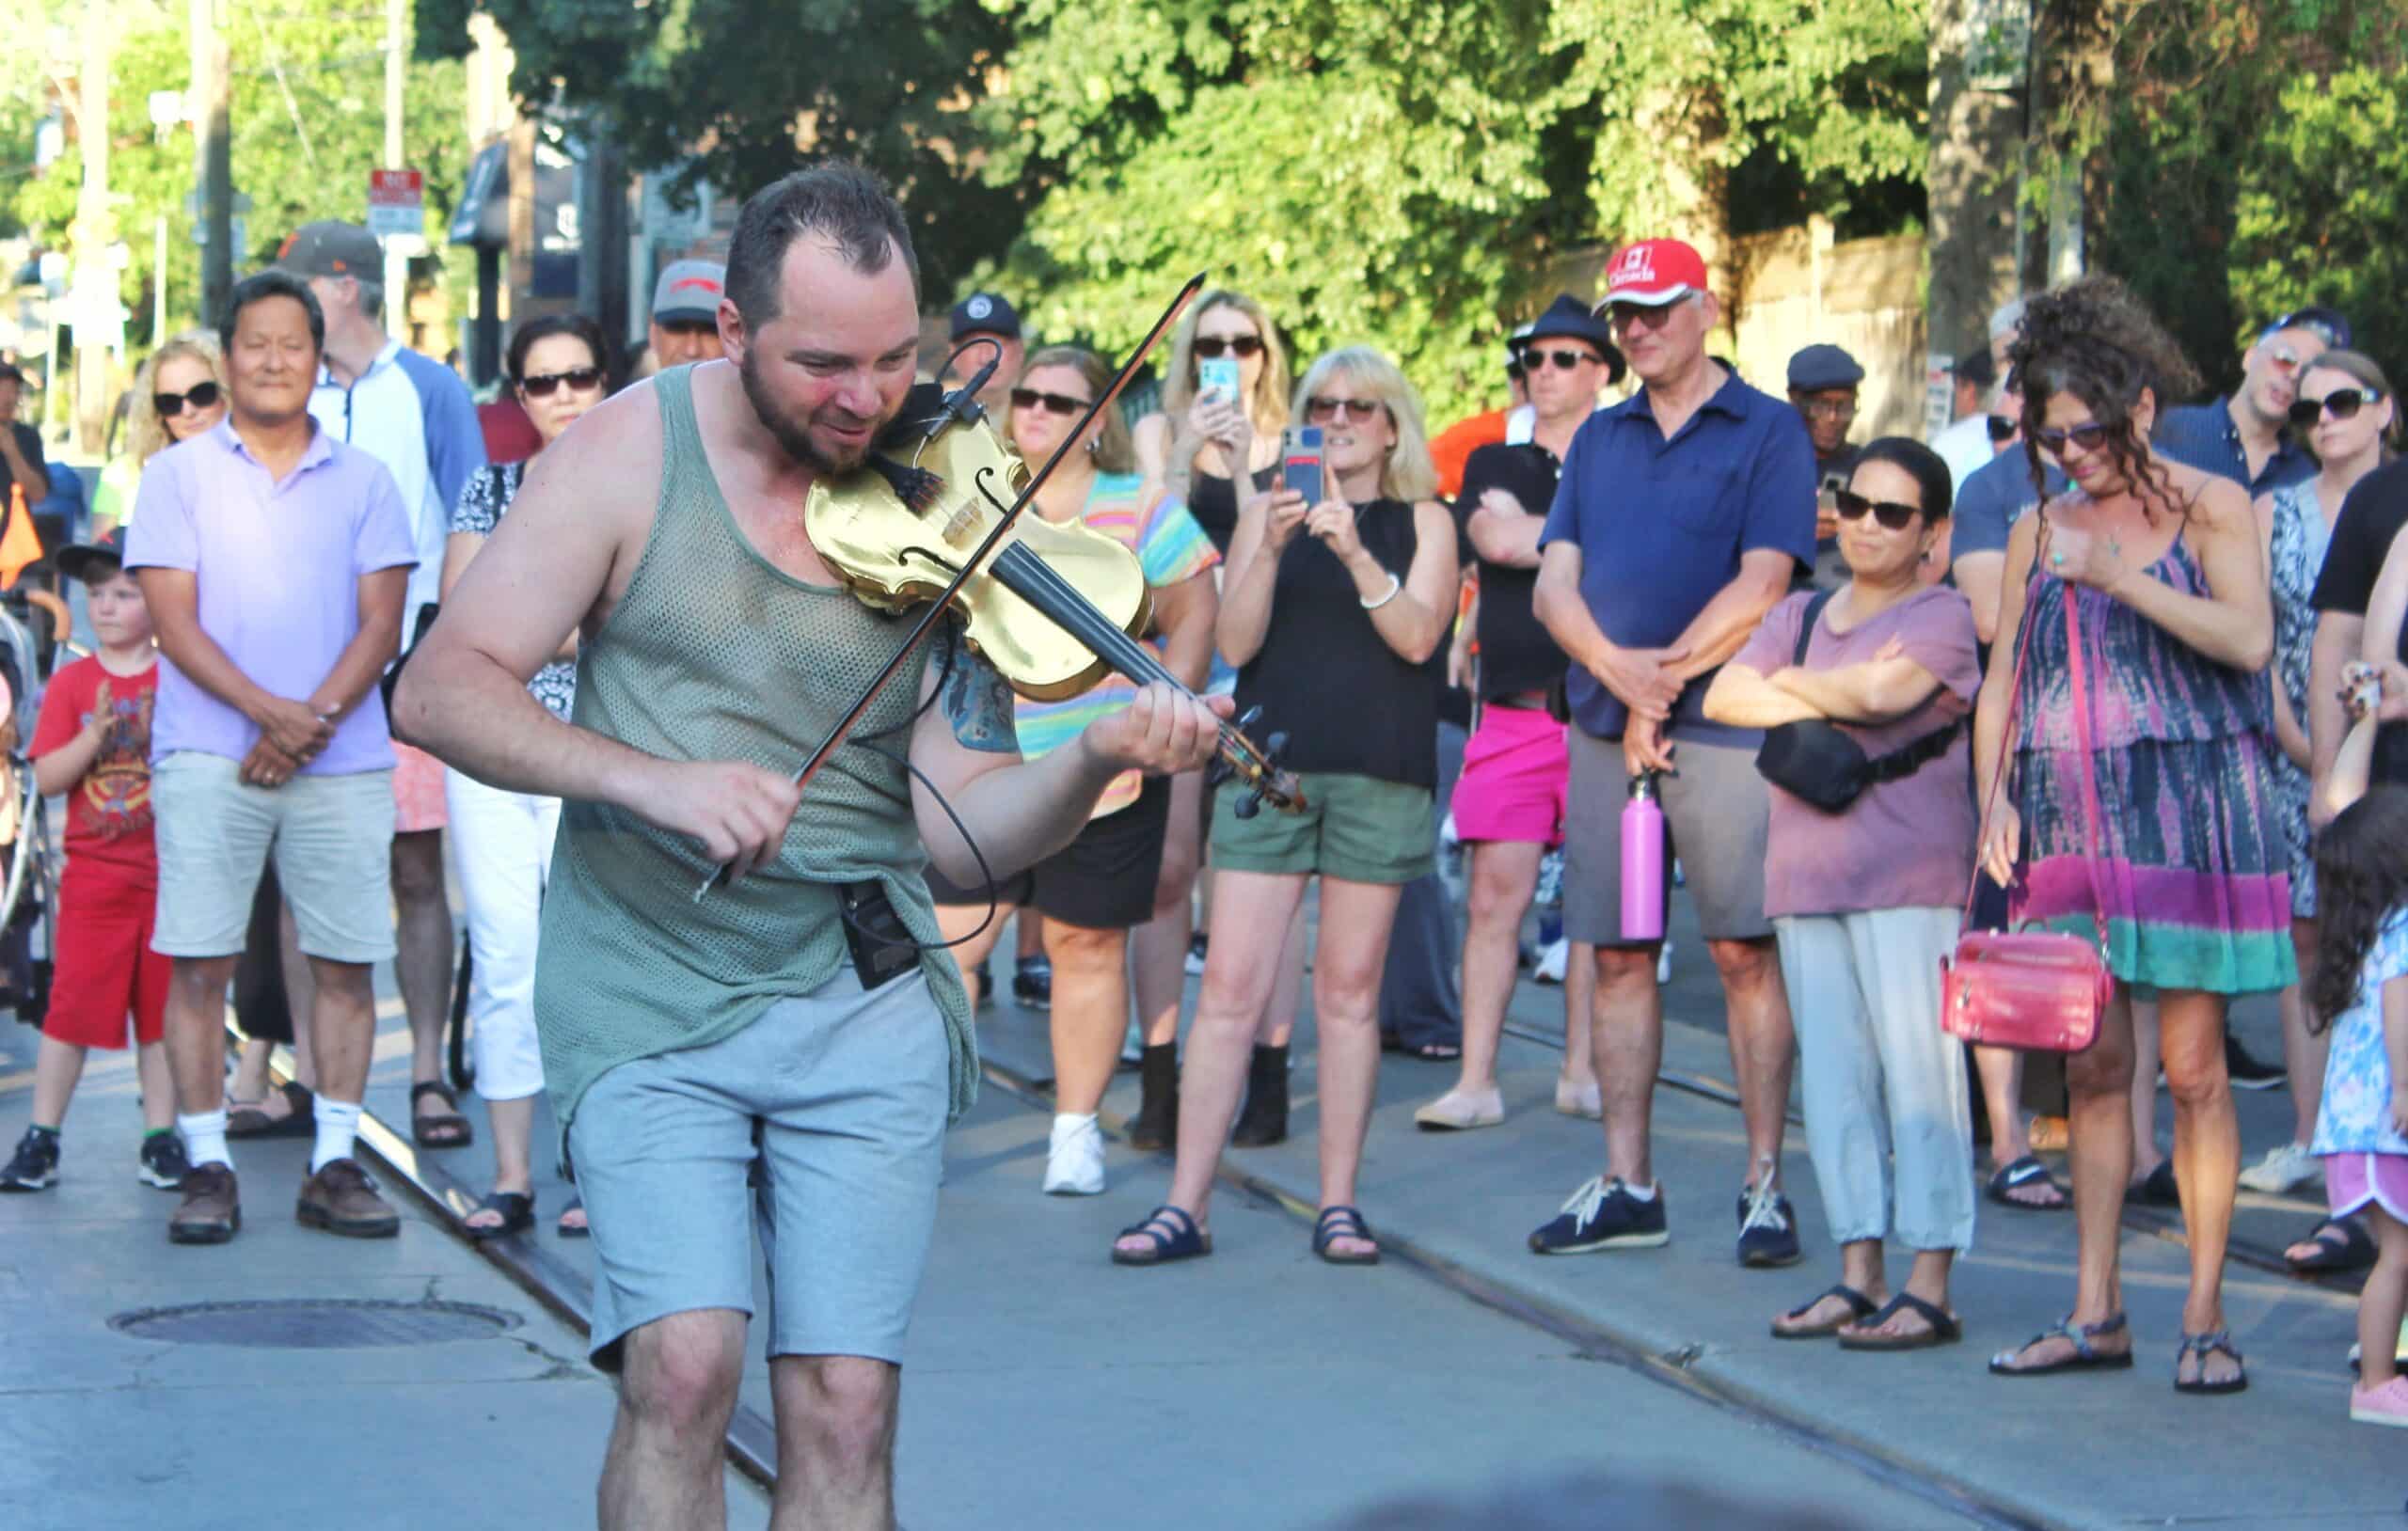 A violinist plays in the street